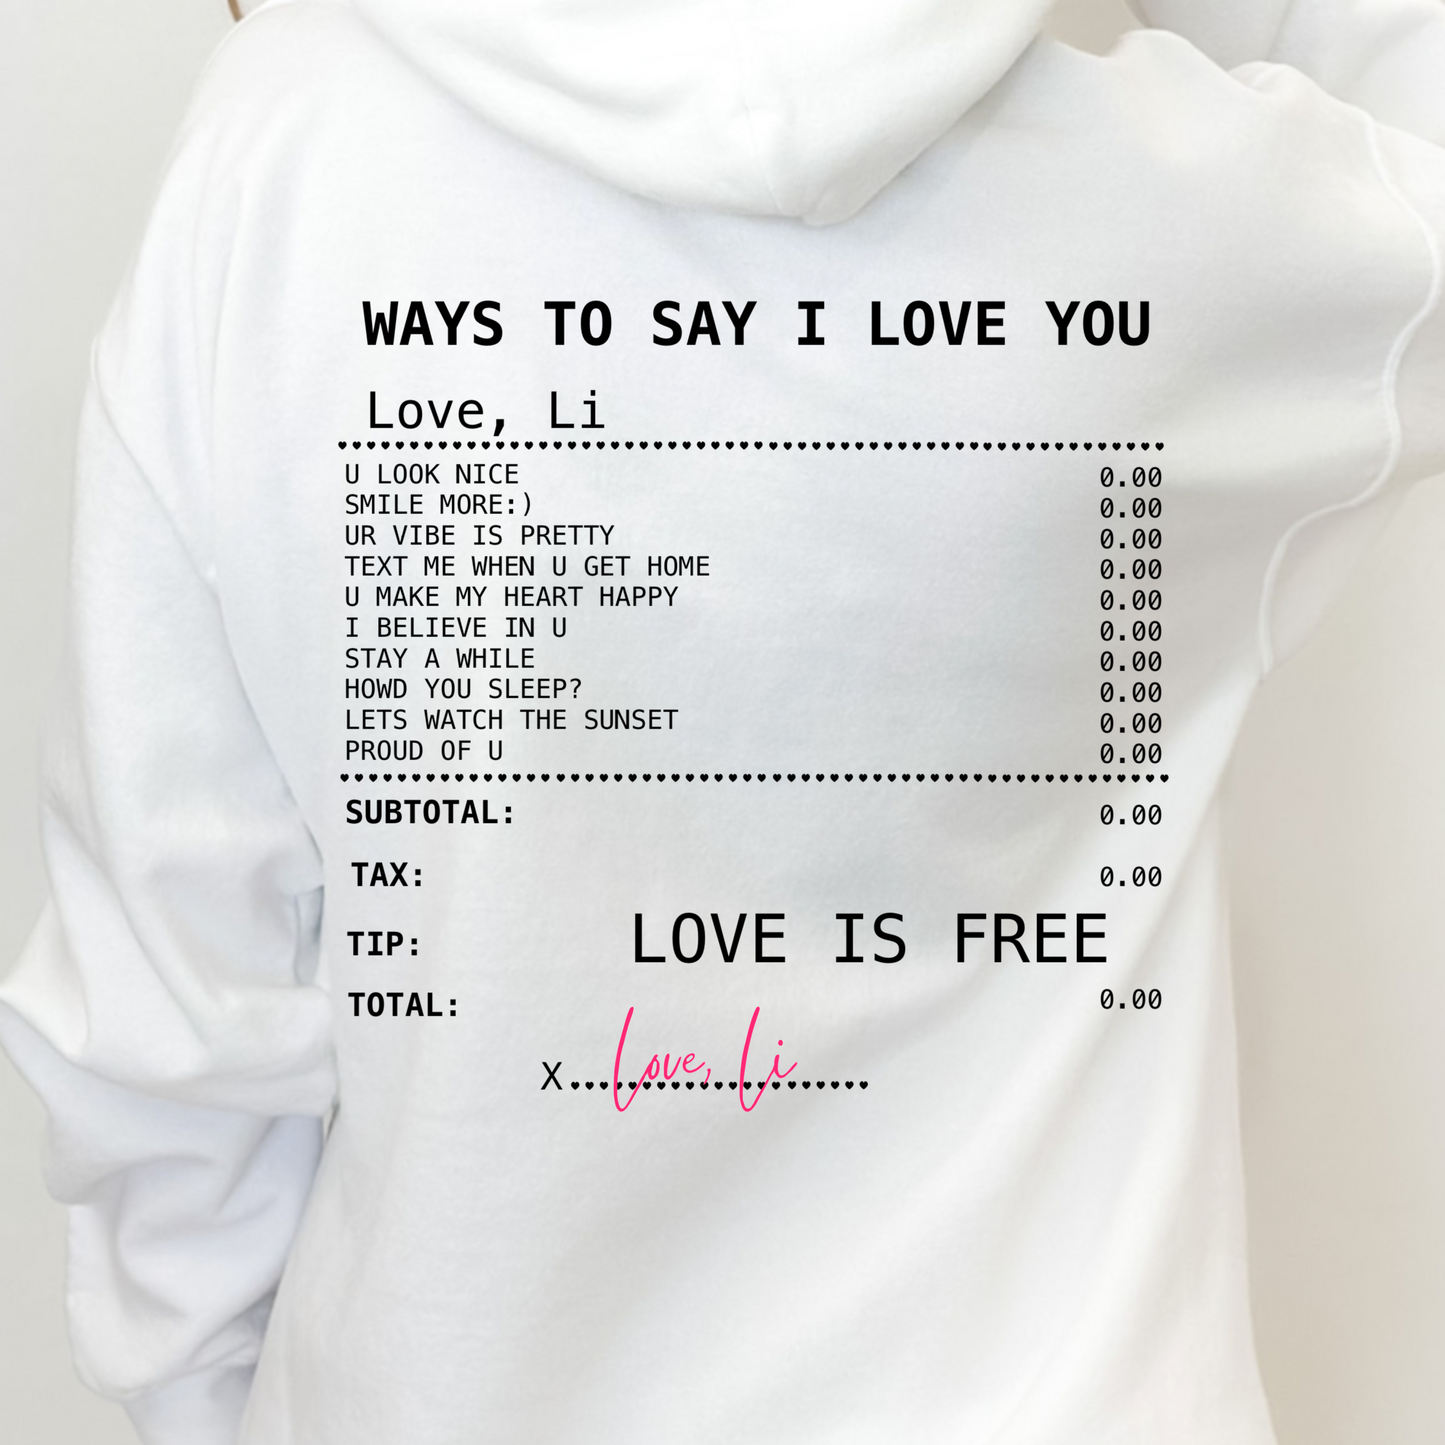 LOVE IS FREE